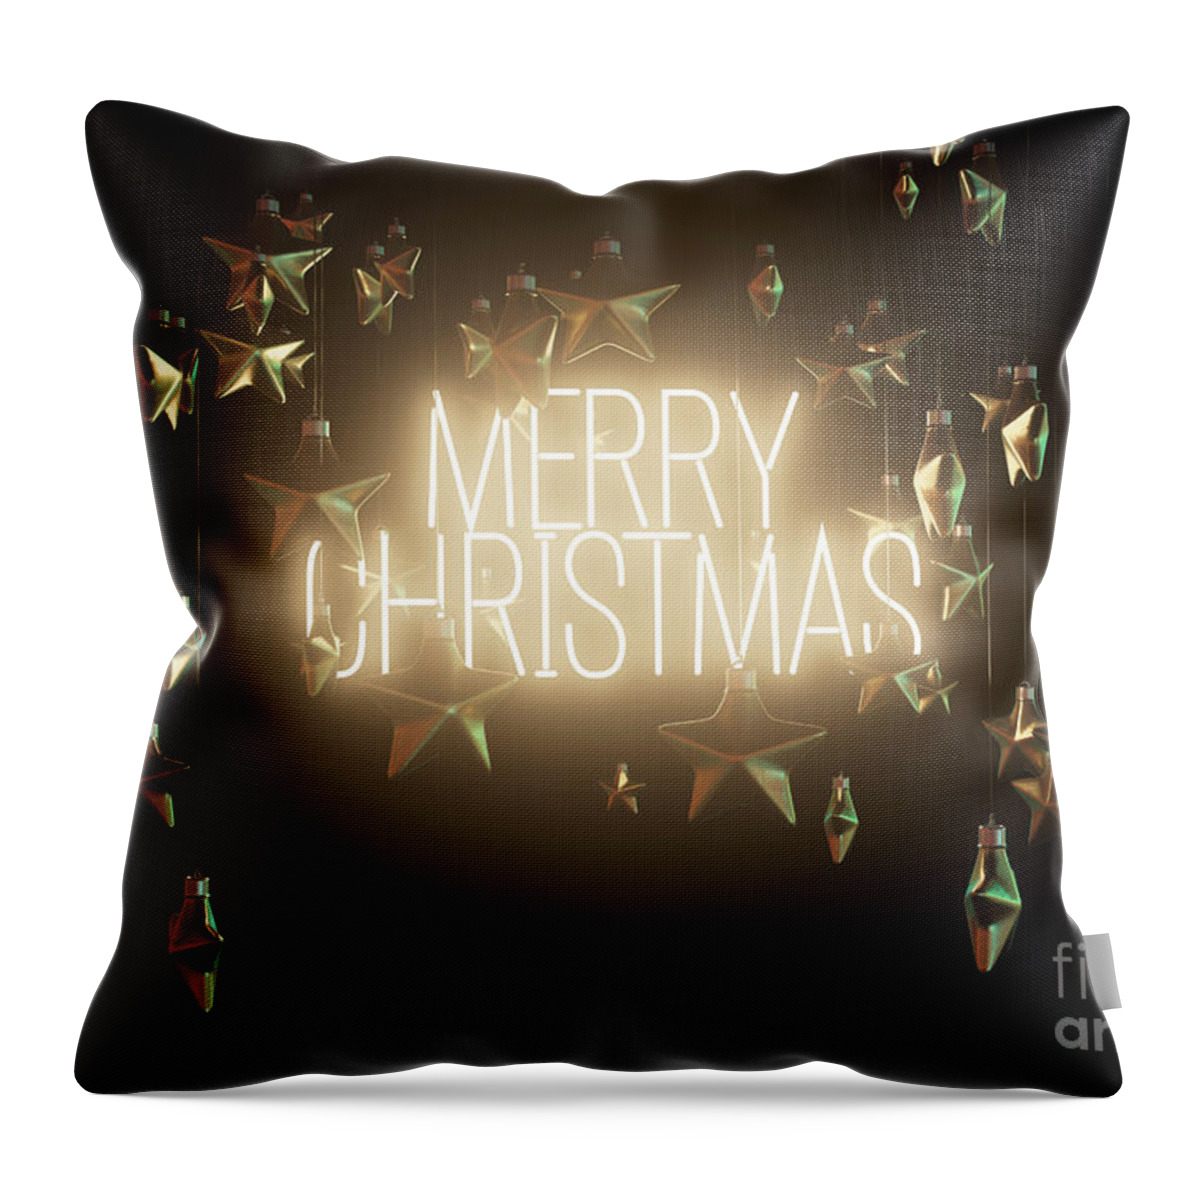 Merry Christmas Throw Pillow featuring the digital art Merry Christmas Star Decoration by Allan Swart